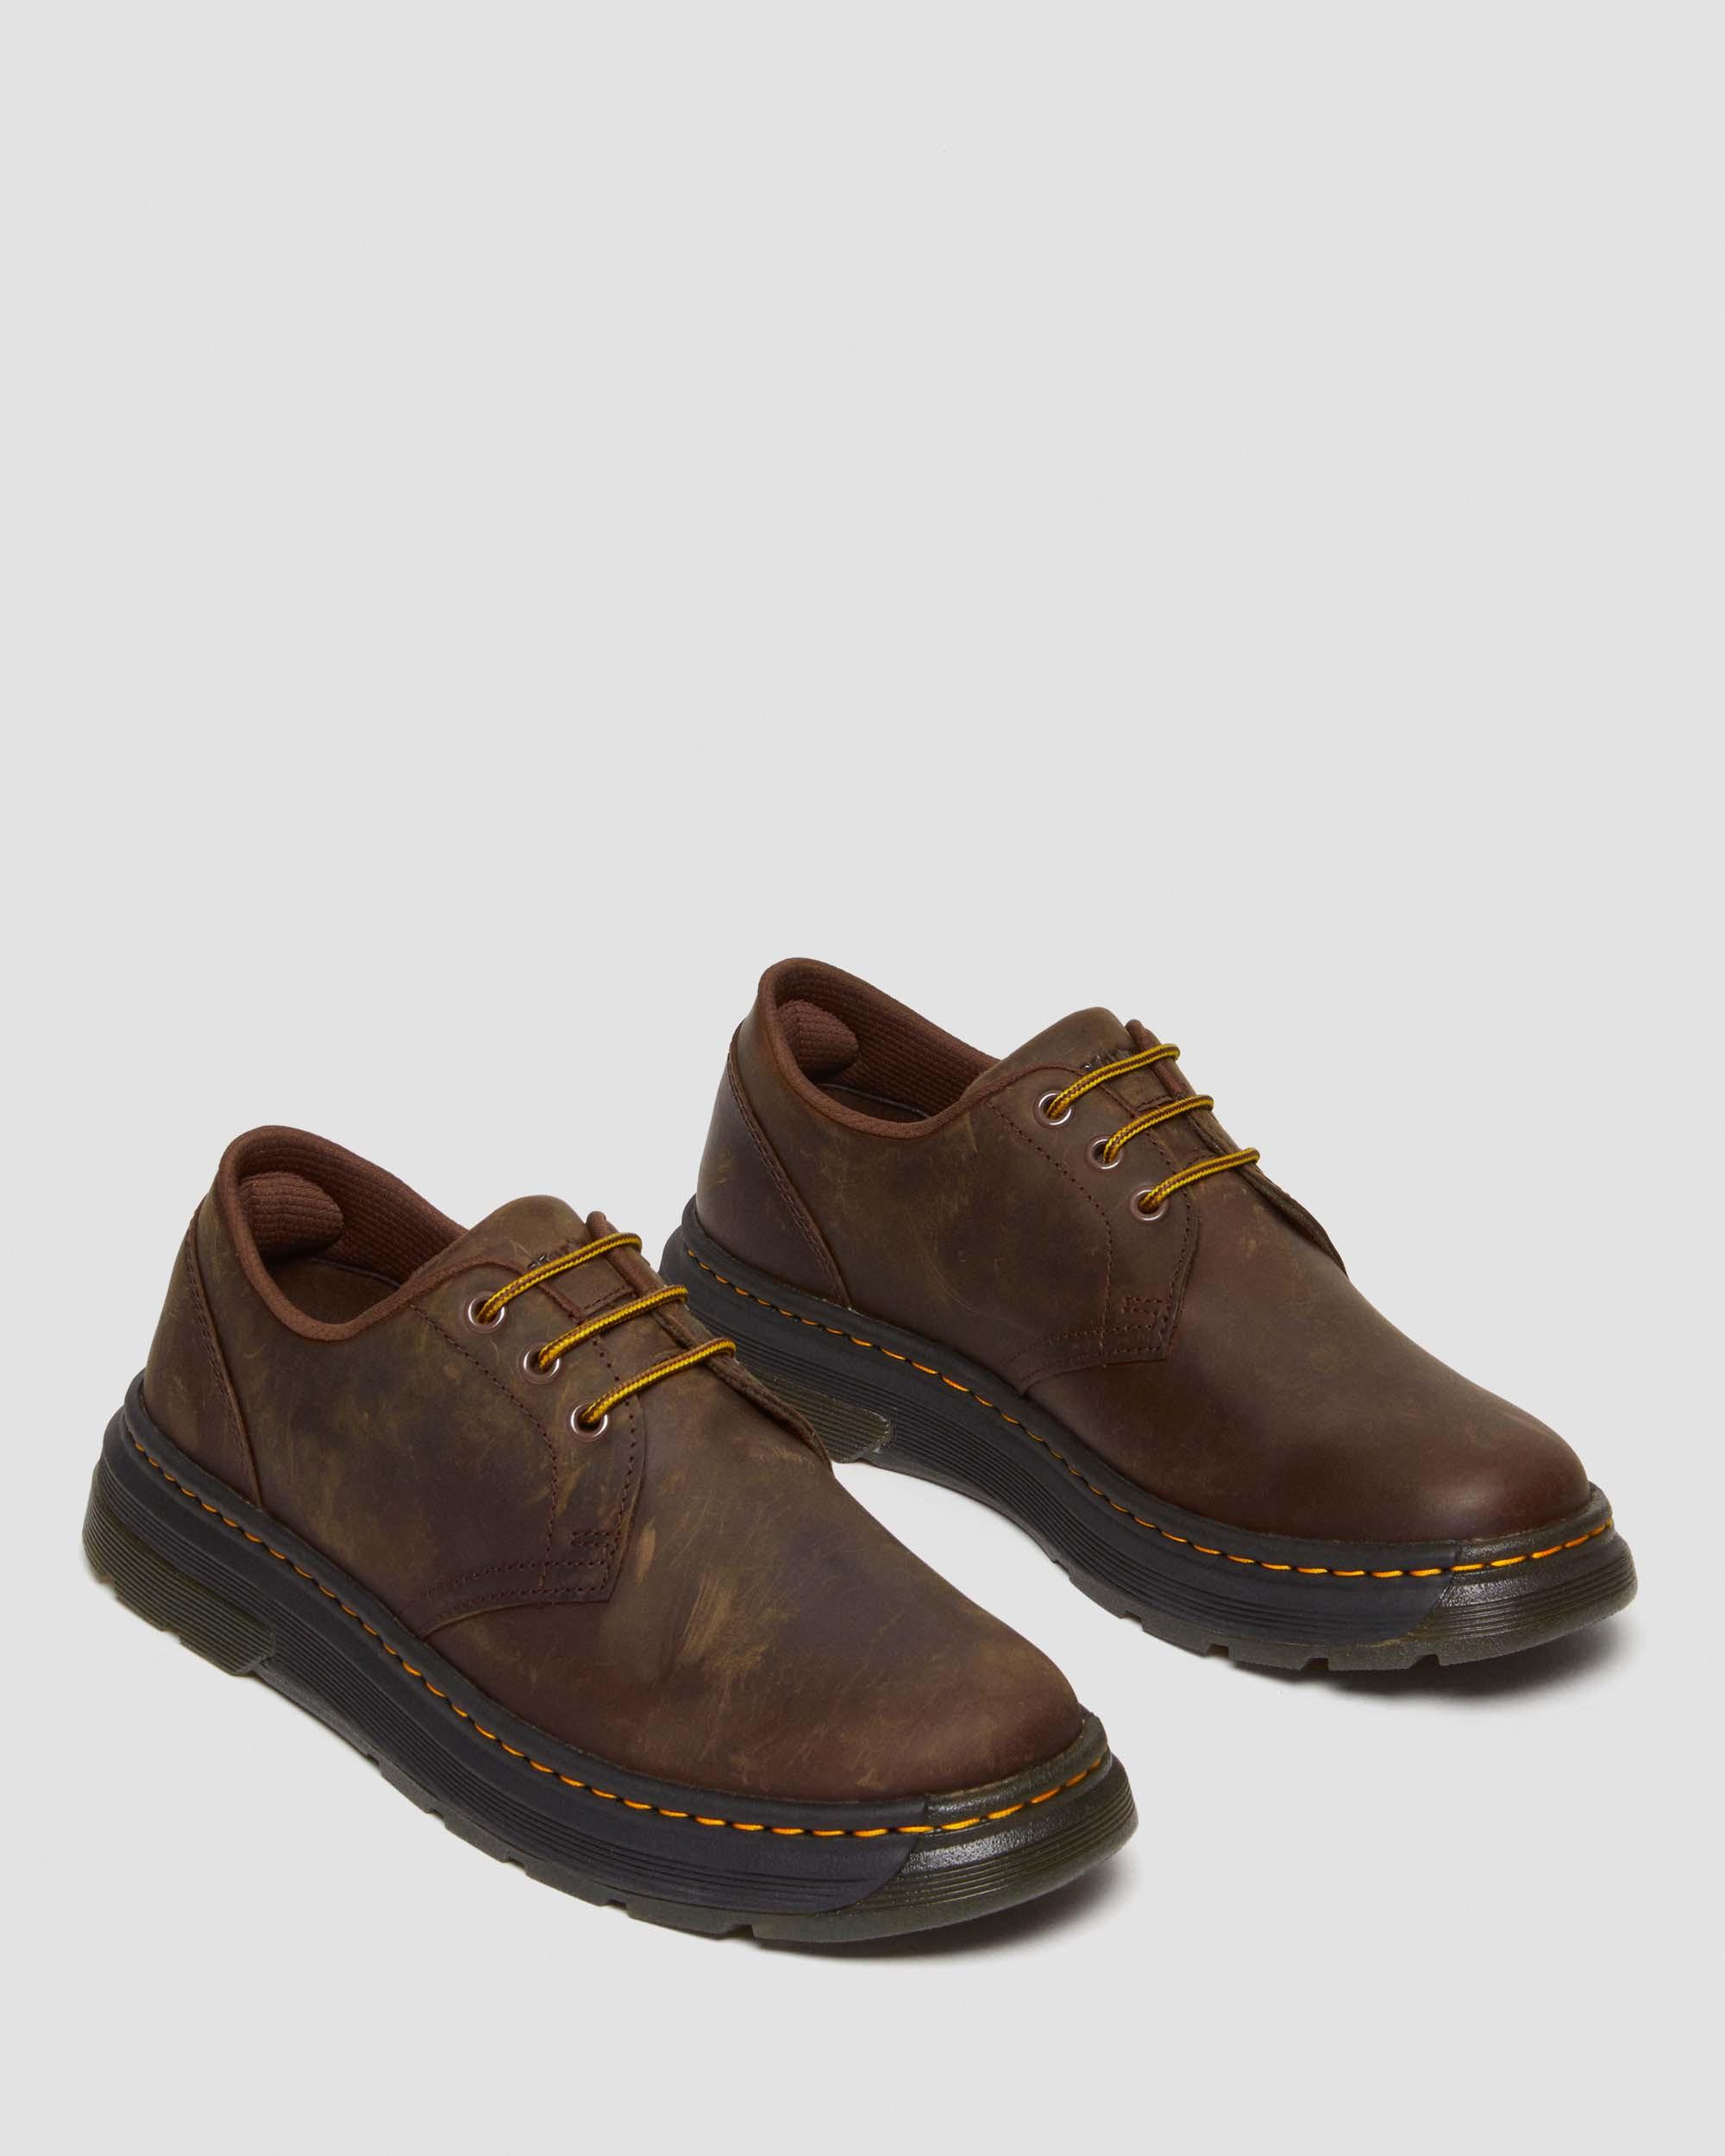 Crewson Lo Crazy Horse Leather Shoes in Dark Brown